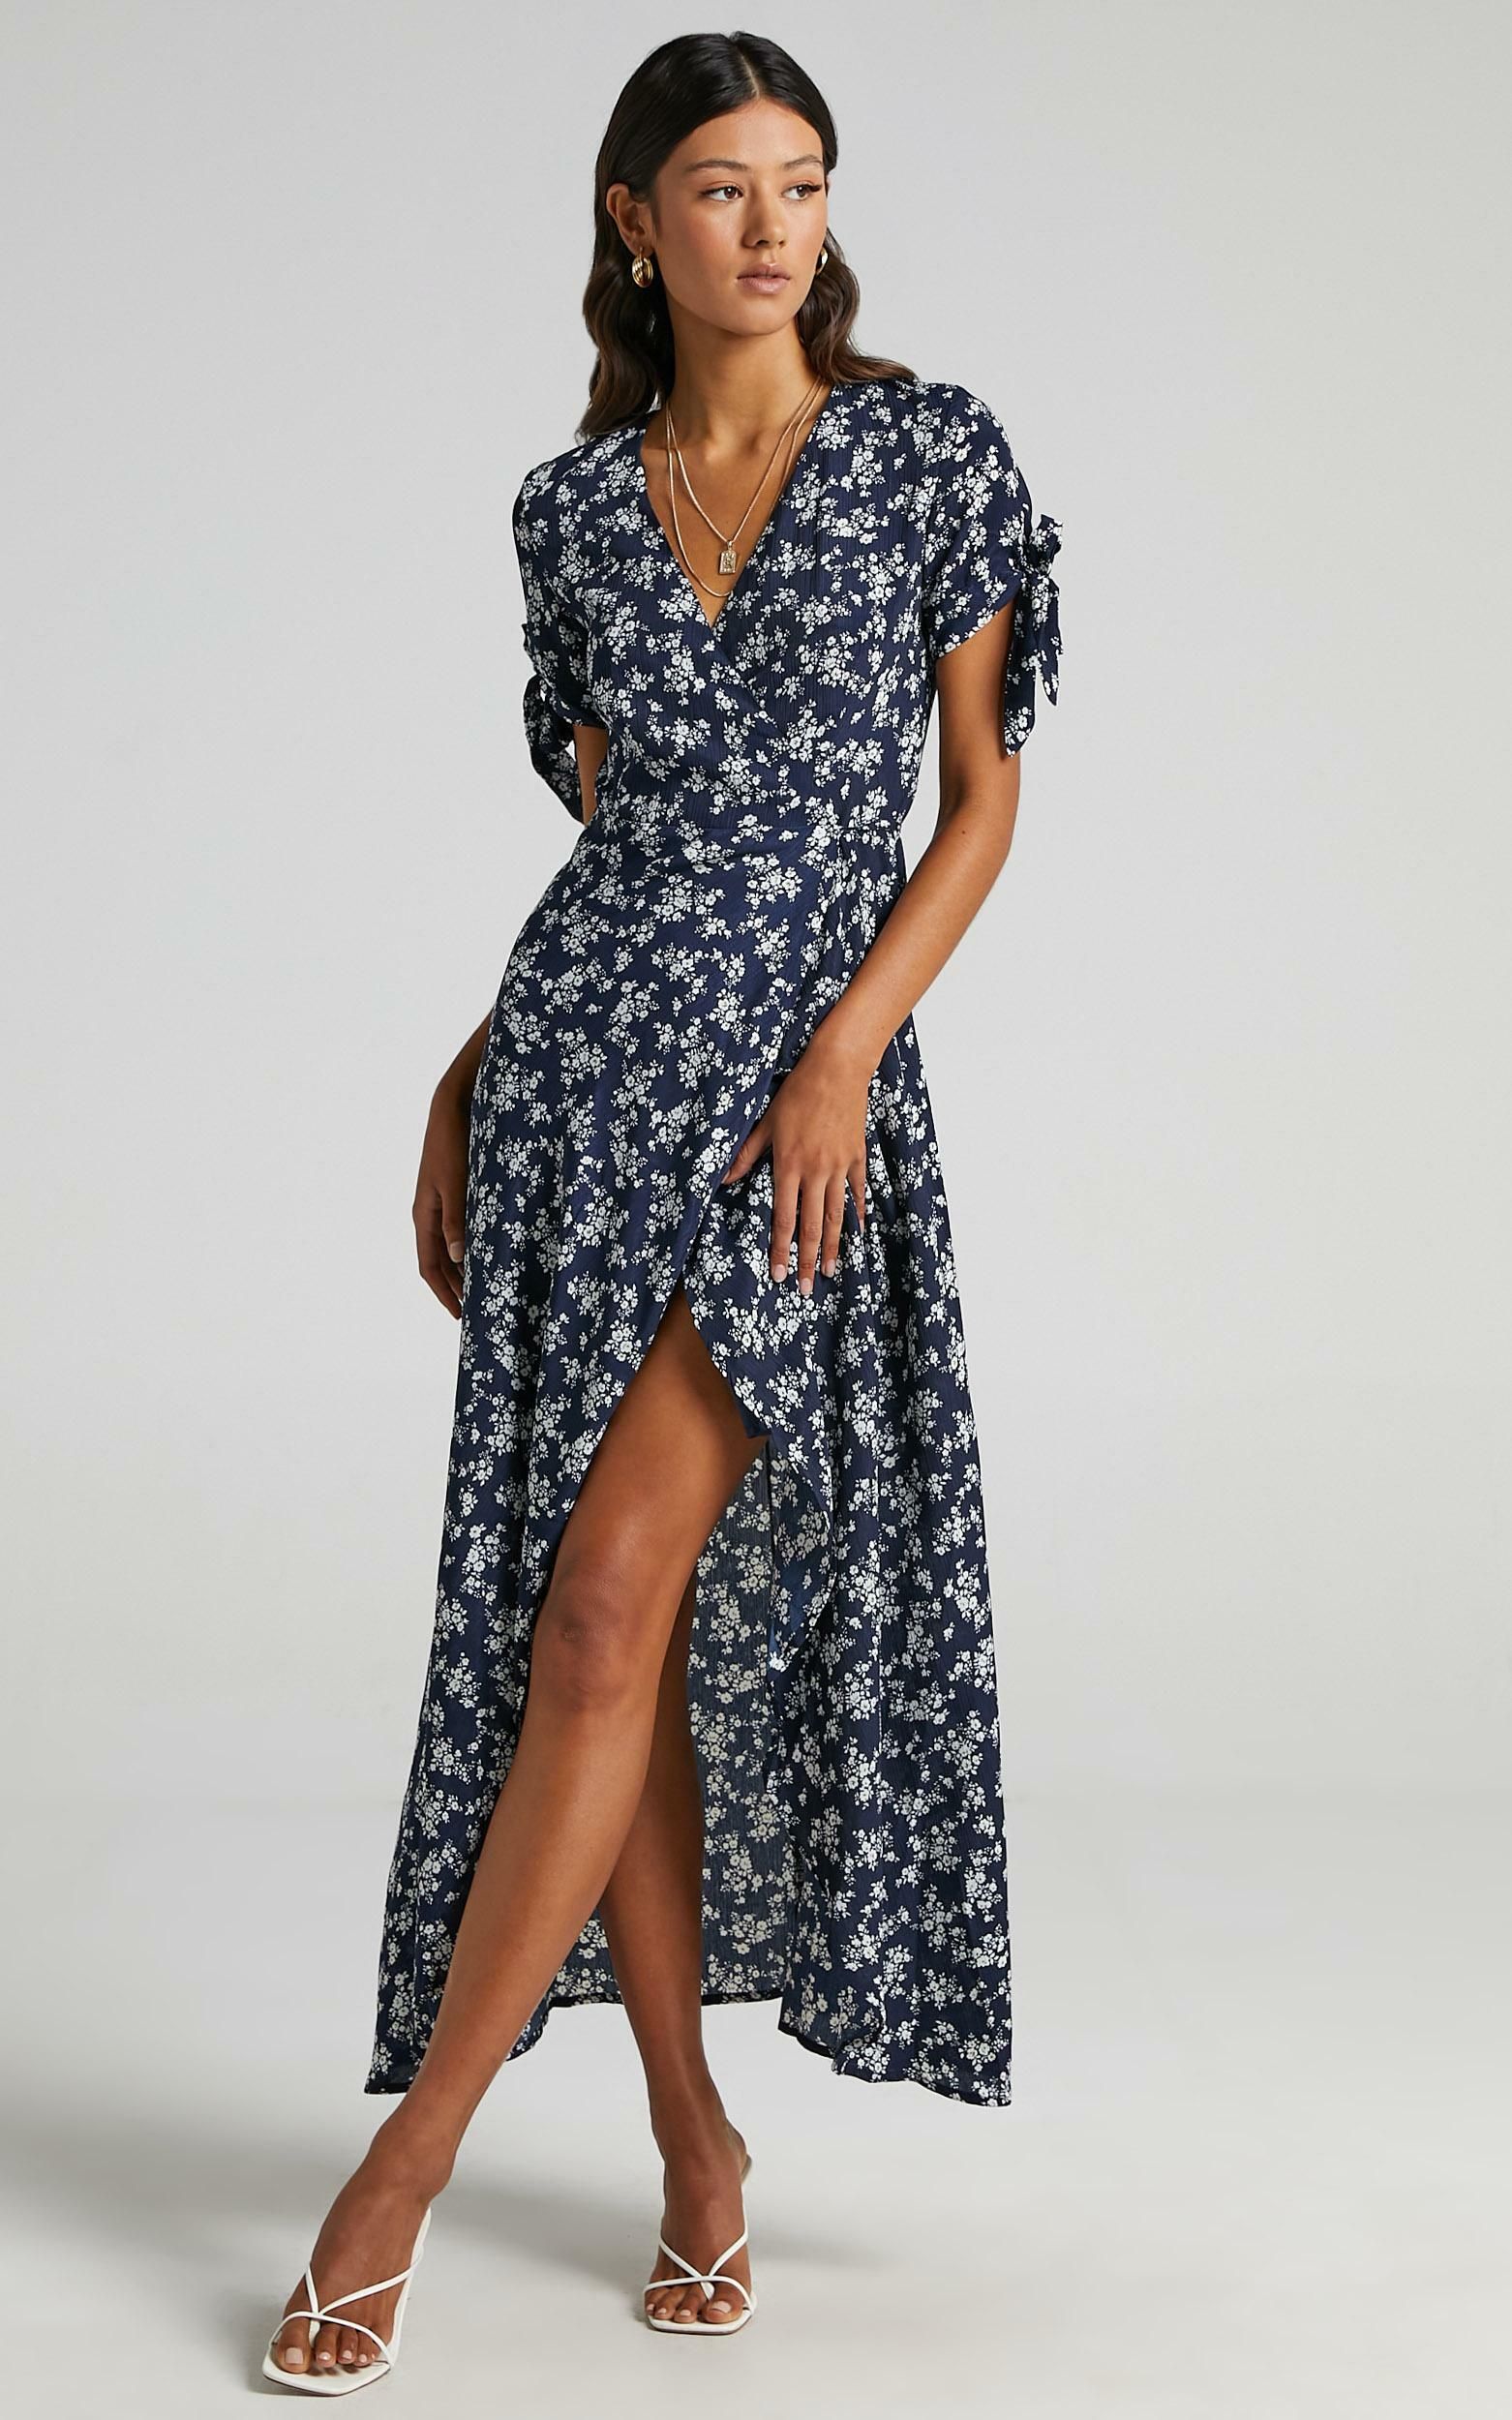 Picking It Up Wrap Maxi Dress in Navy Floral | Showpo - deactived